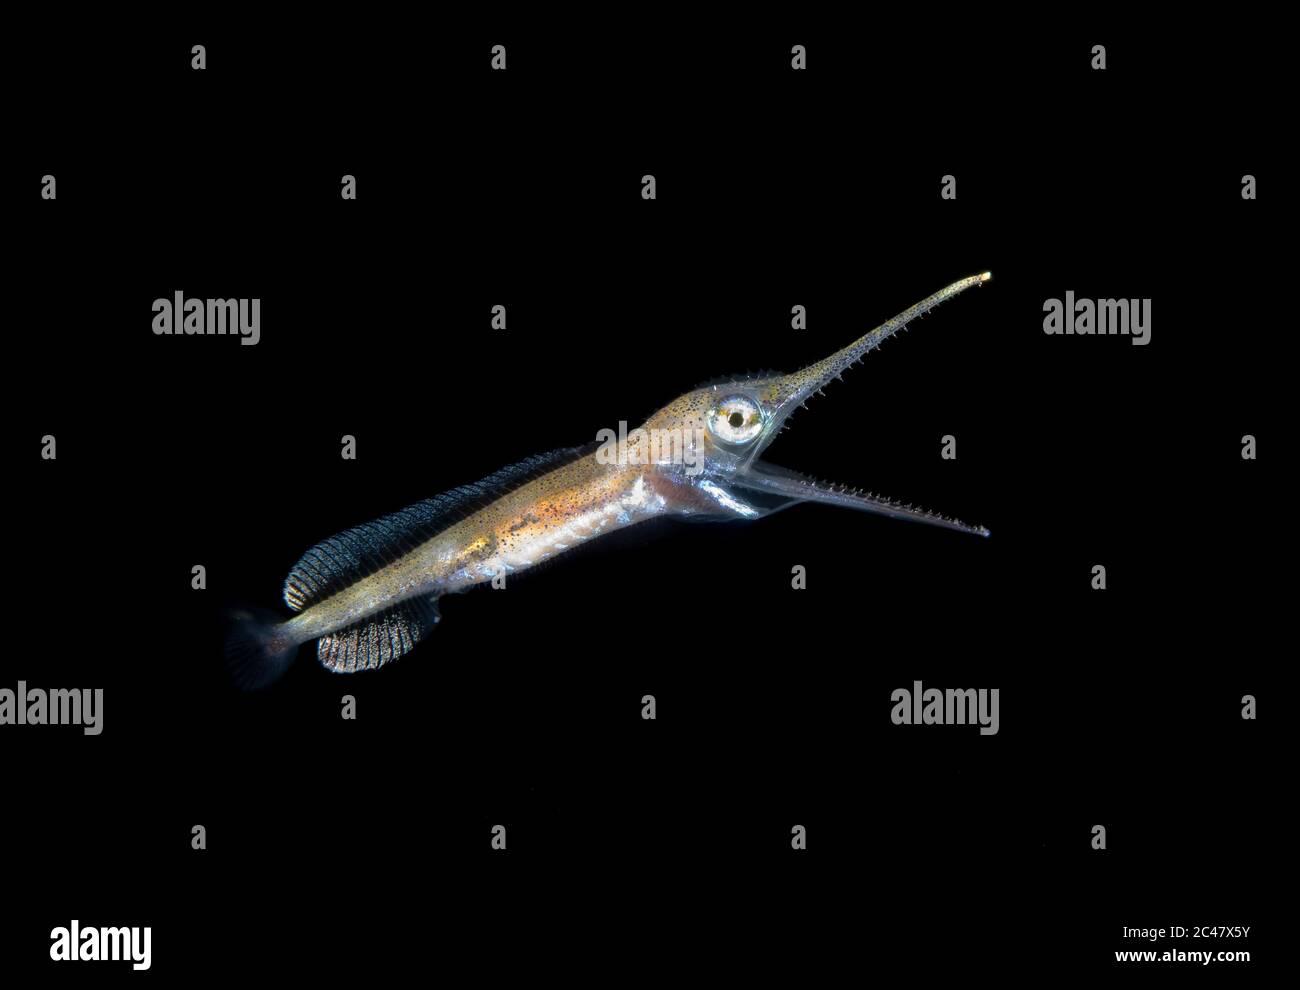 1 cm long larval Swordfish, Xiphias gladius photographed yawning during a Blackwater drift dive in open ocean at 40 feet with bottom at 600 plus feet Stock Photo